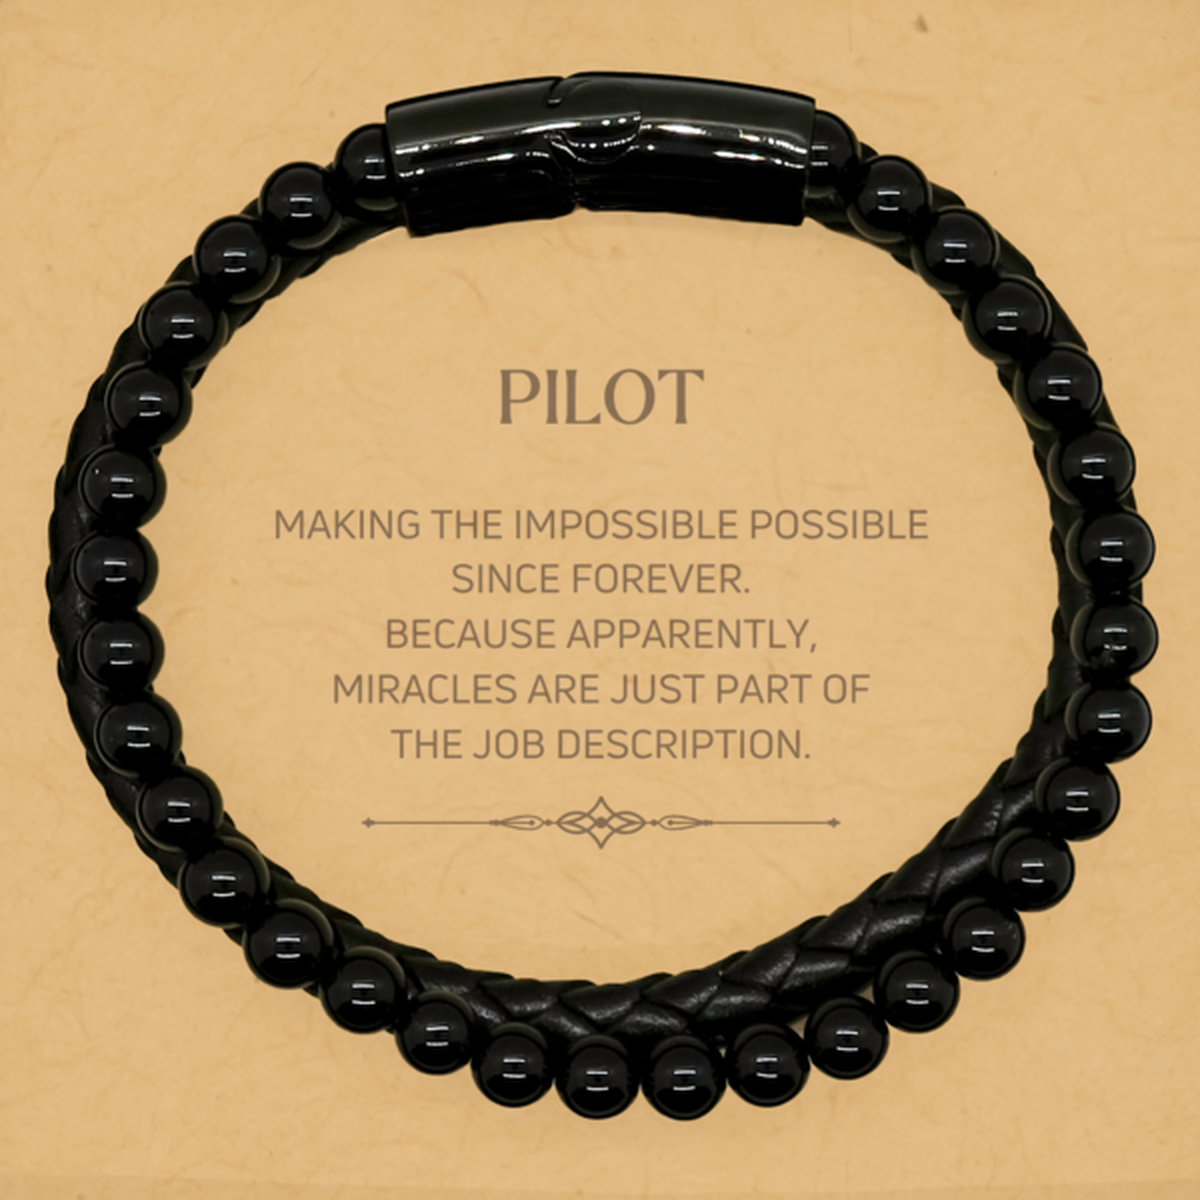 Funny Pilot Gifts, Miracles are just part of the job description, Inspirational Birthday Stone Leather Bracelets For Pilot, Men, Women, Coworkers, Friends, Boss